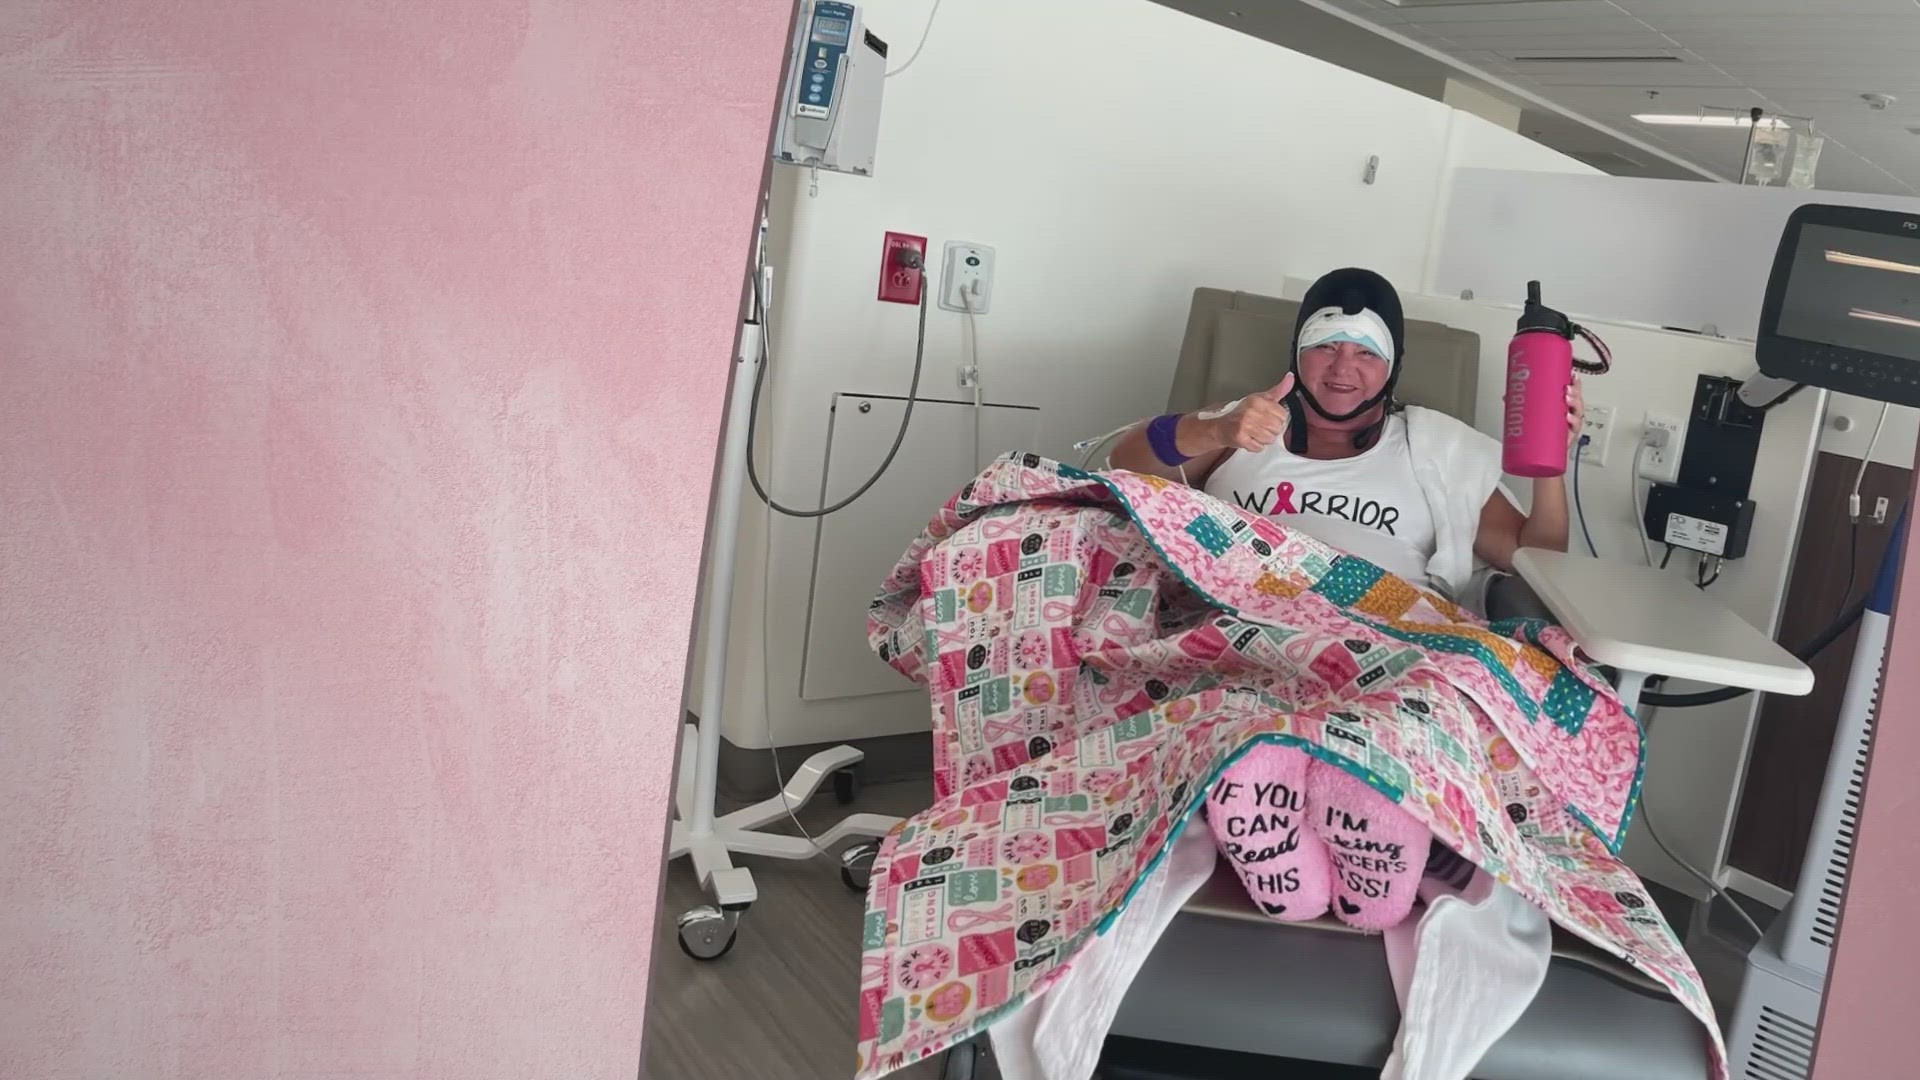 Cathy Baughman's chemo therapy includes something extra on her head, called cold cap therapy. She wears it five hours each time while receiving chemo.